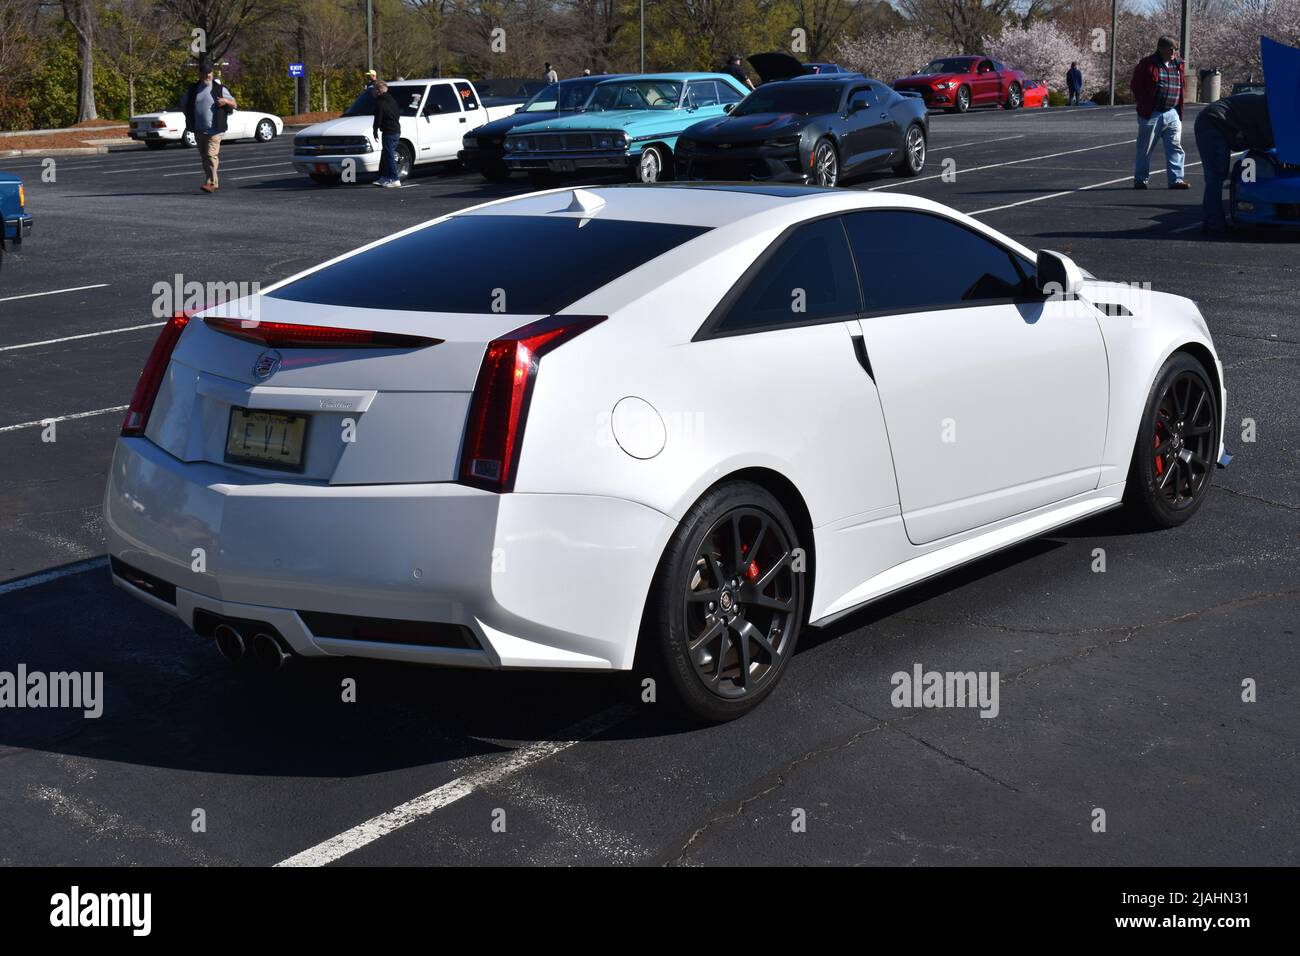 A Cadillac CTS-V 2 door Coupe on display at a car show. Stock Photo